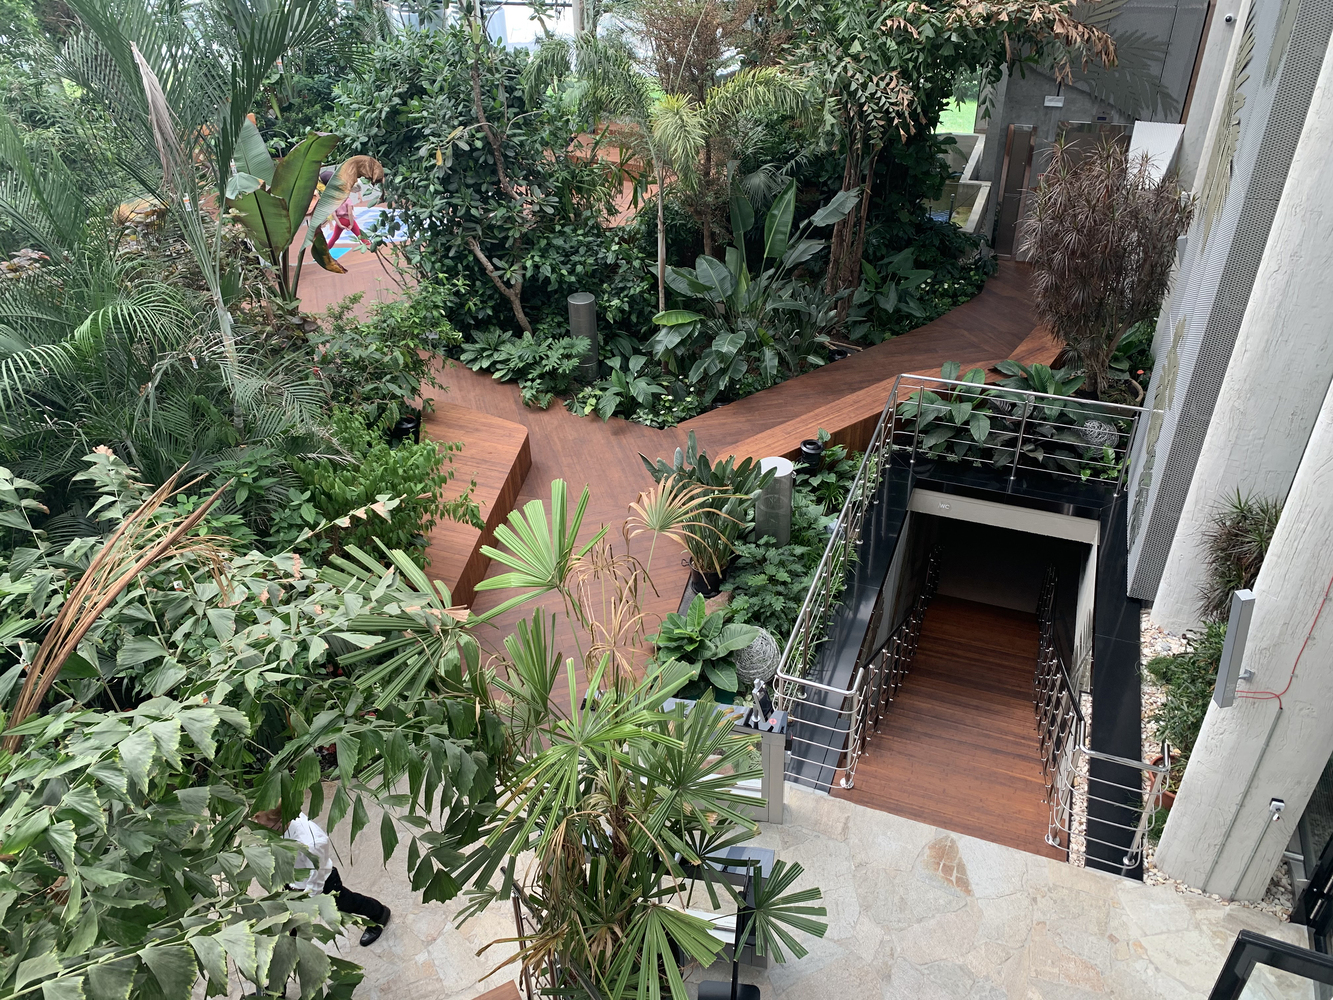 Each zone in the garden is connected by wooden walkways